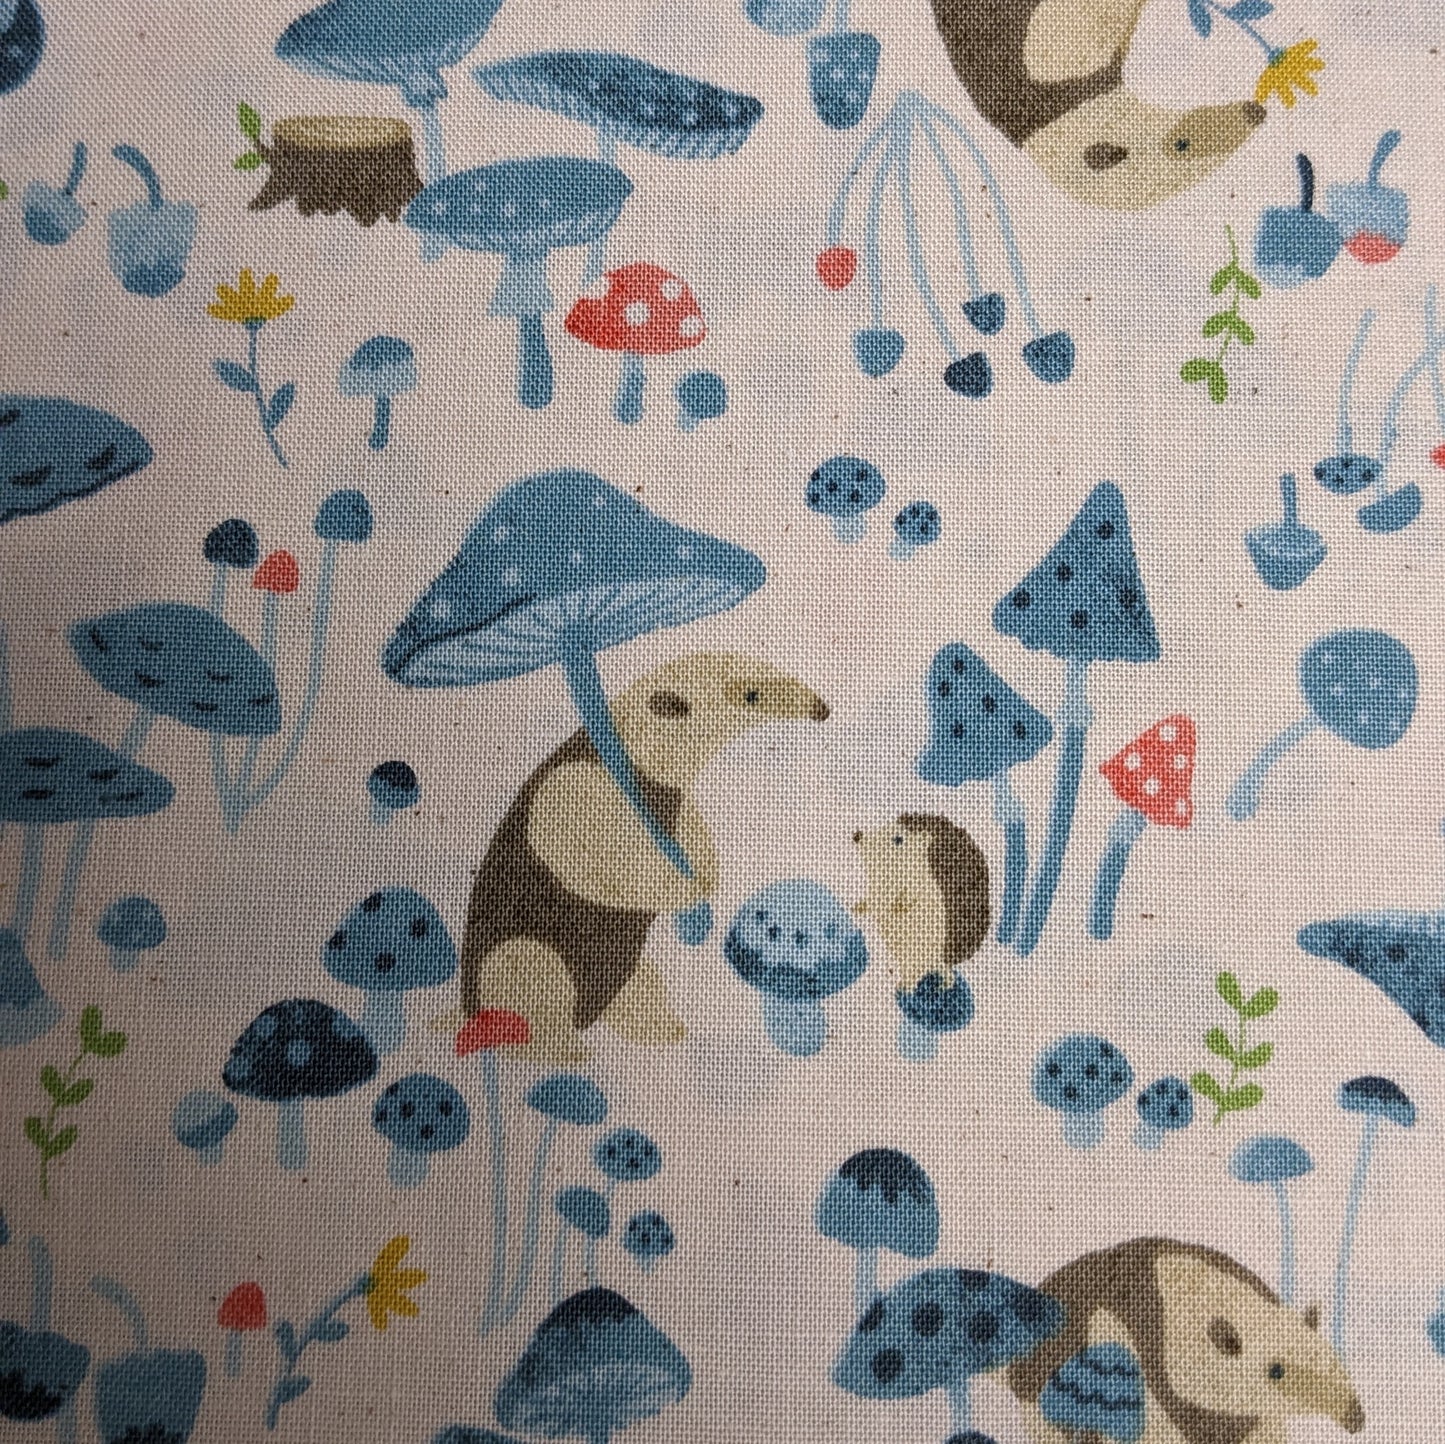 Anteaters, Hedgehogs and Toadstools on Natural